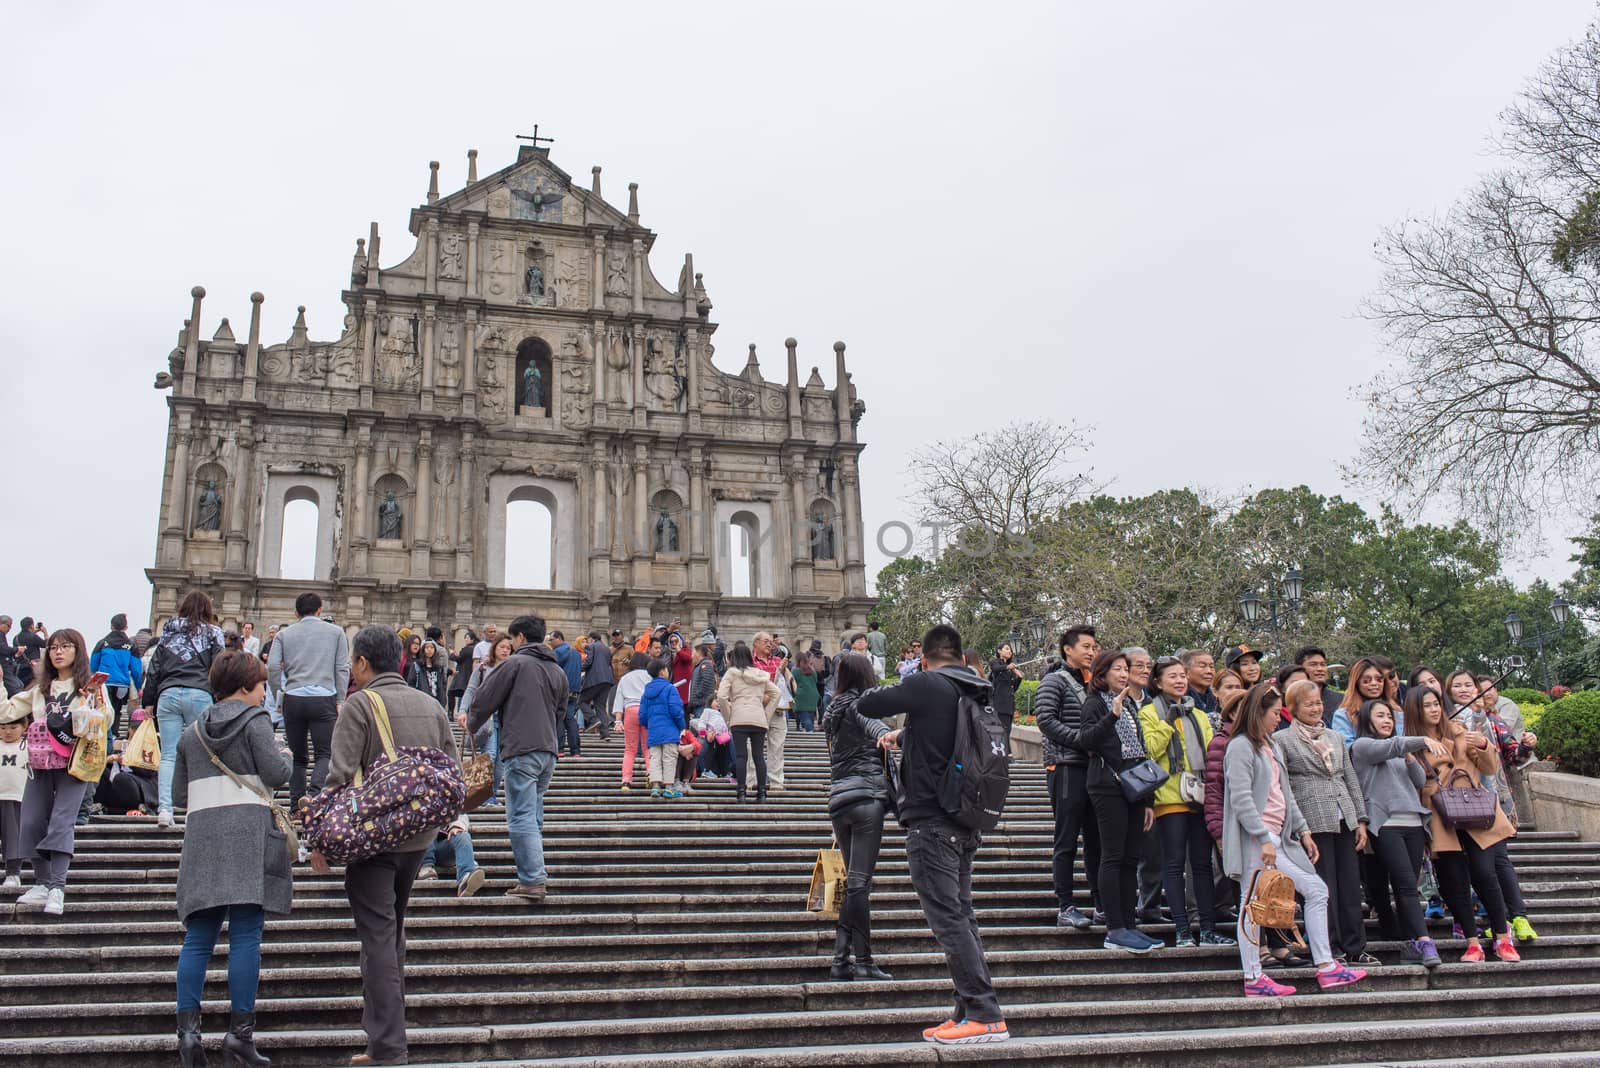 MACAU - March 14, 2016: Ruins of Saint Paul's Cathedral - the famous landmarks of Macau. The Historic Centre of Macau, a UNESCO World Heritage Site.